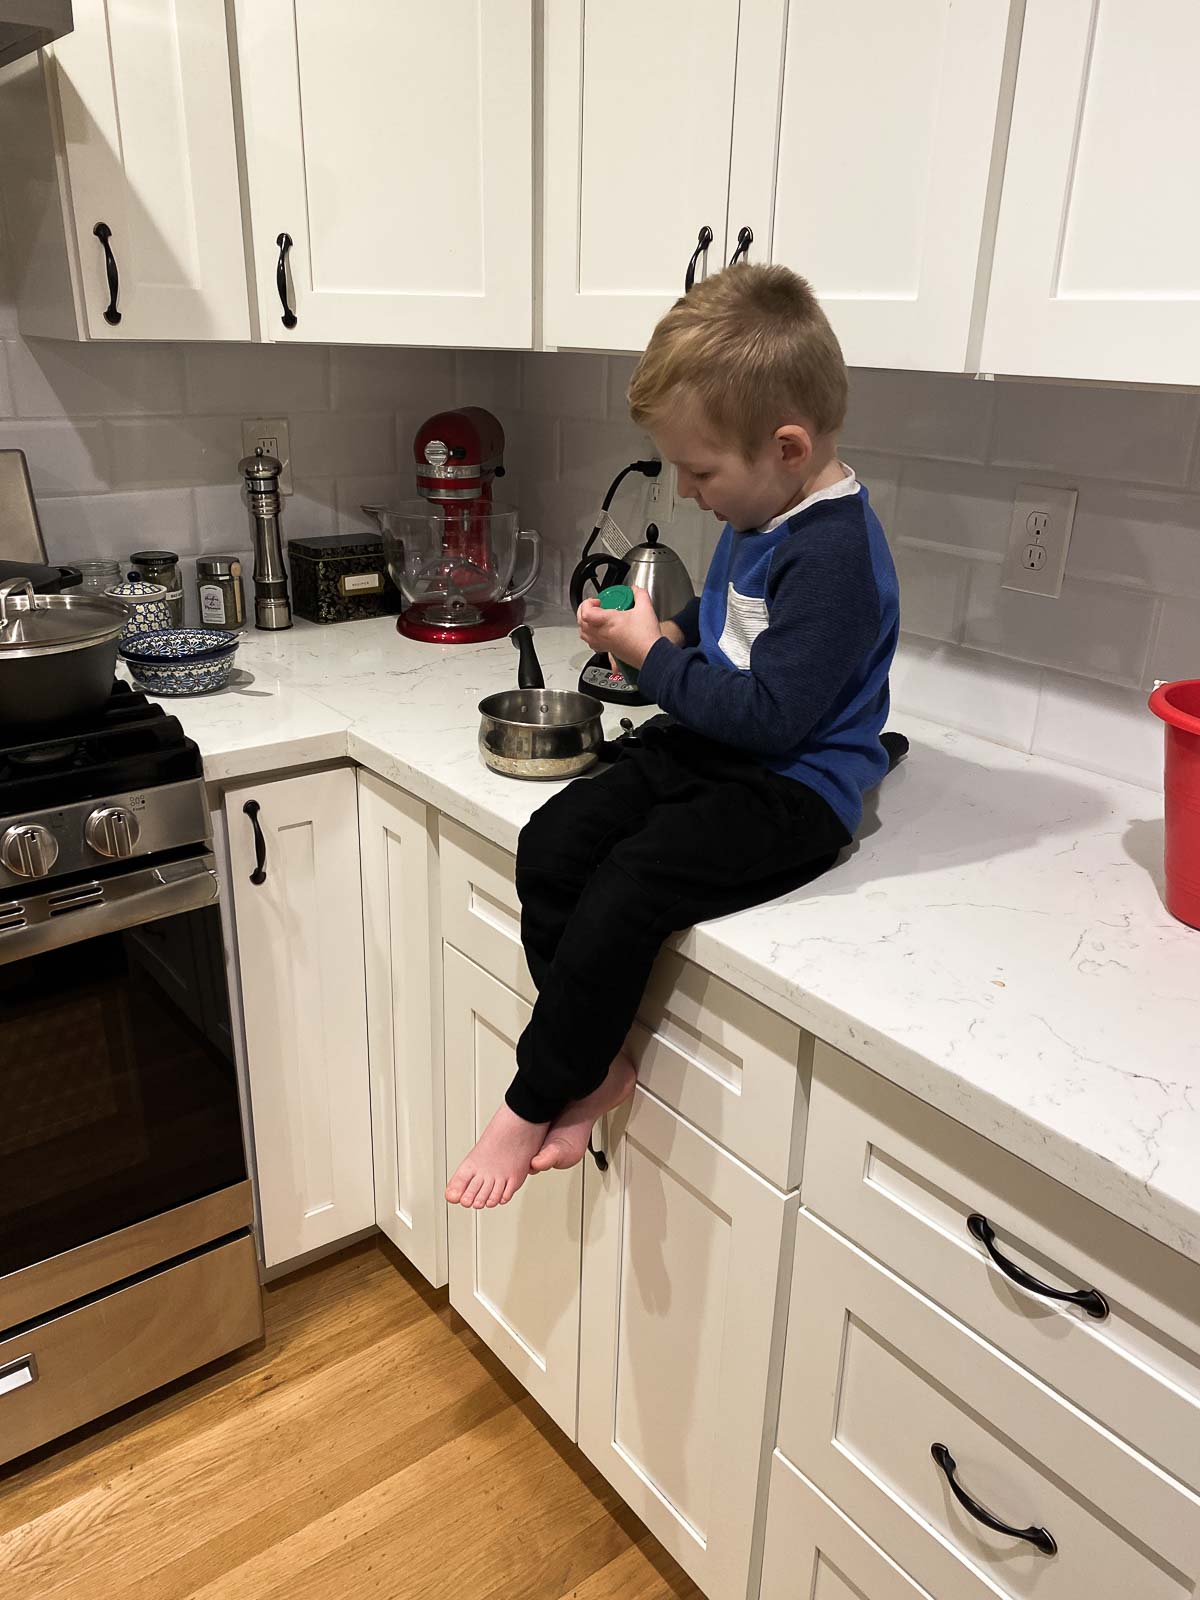 Kid sitting on counter - Toddlers and Food Waste